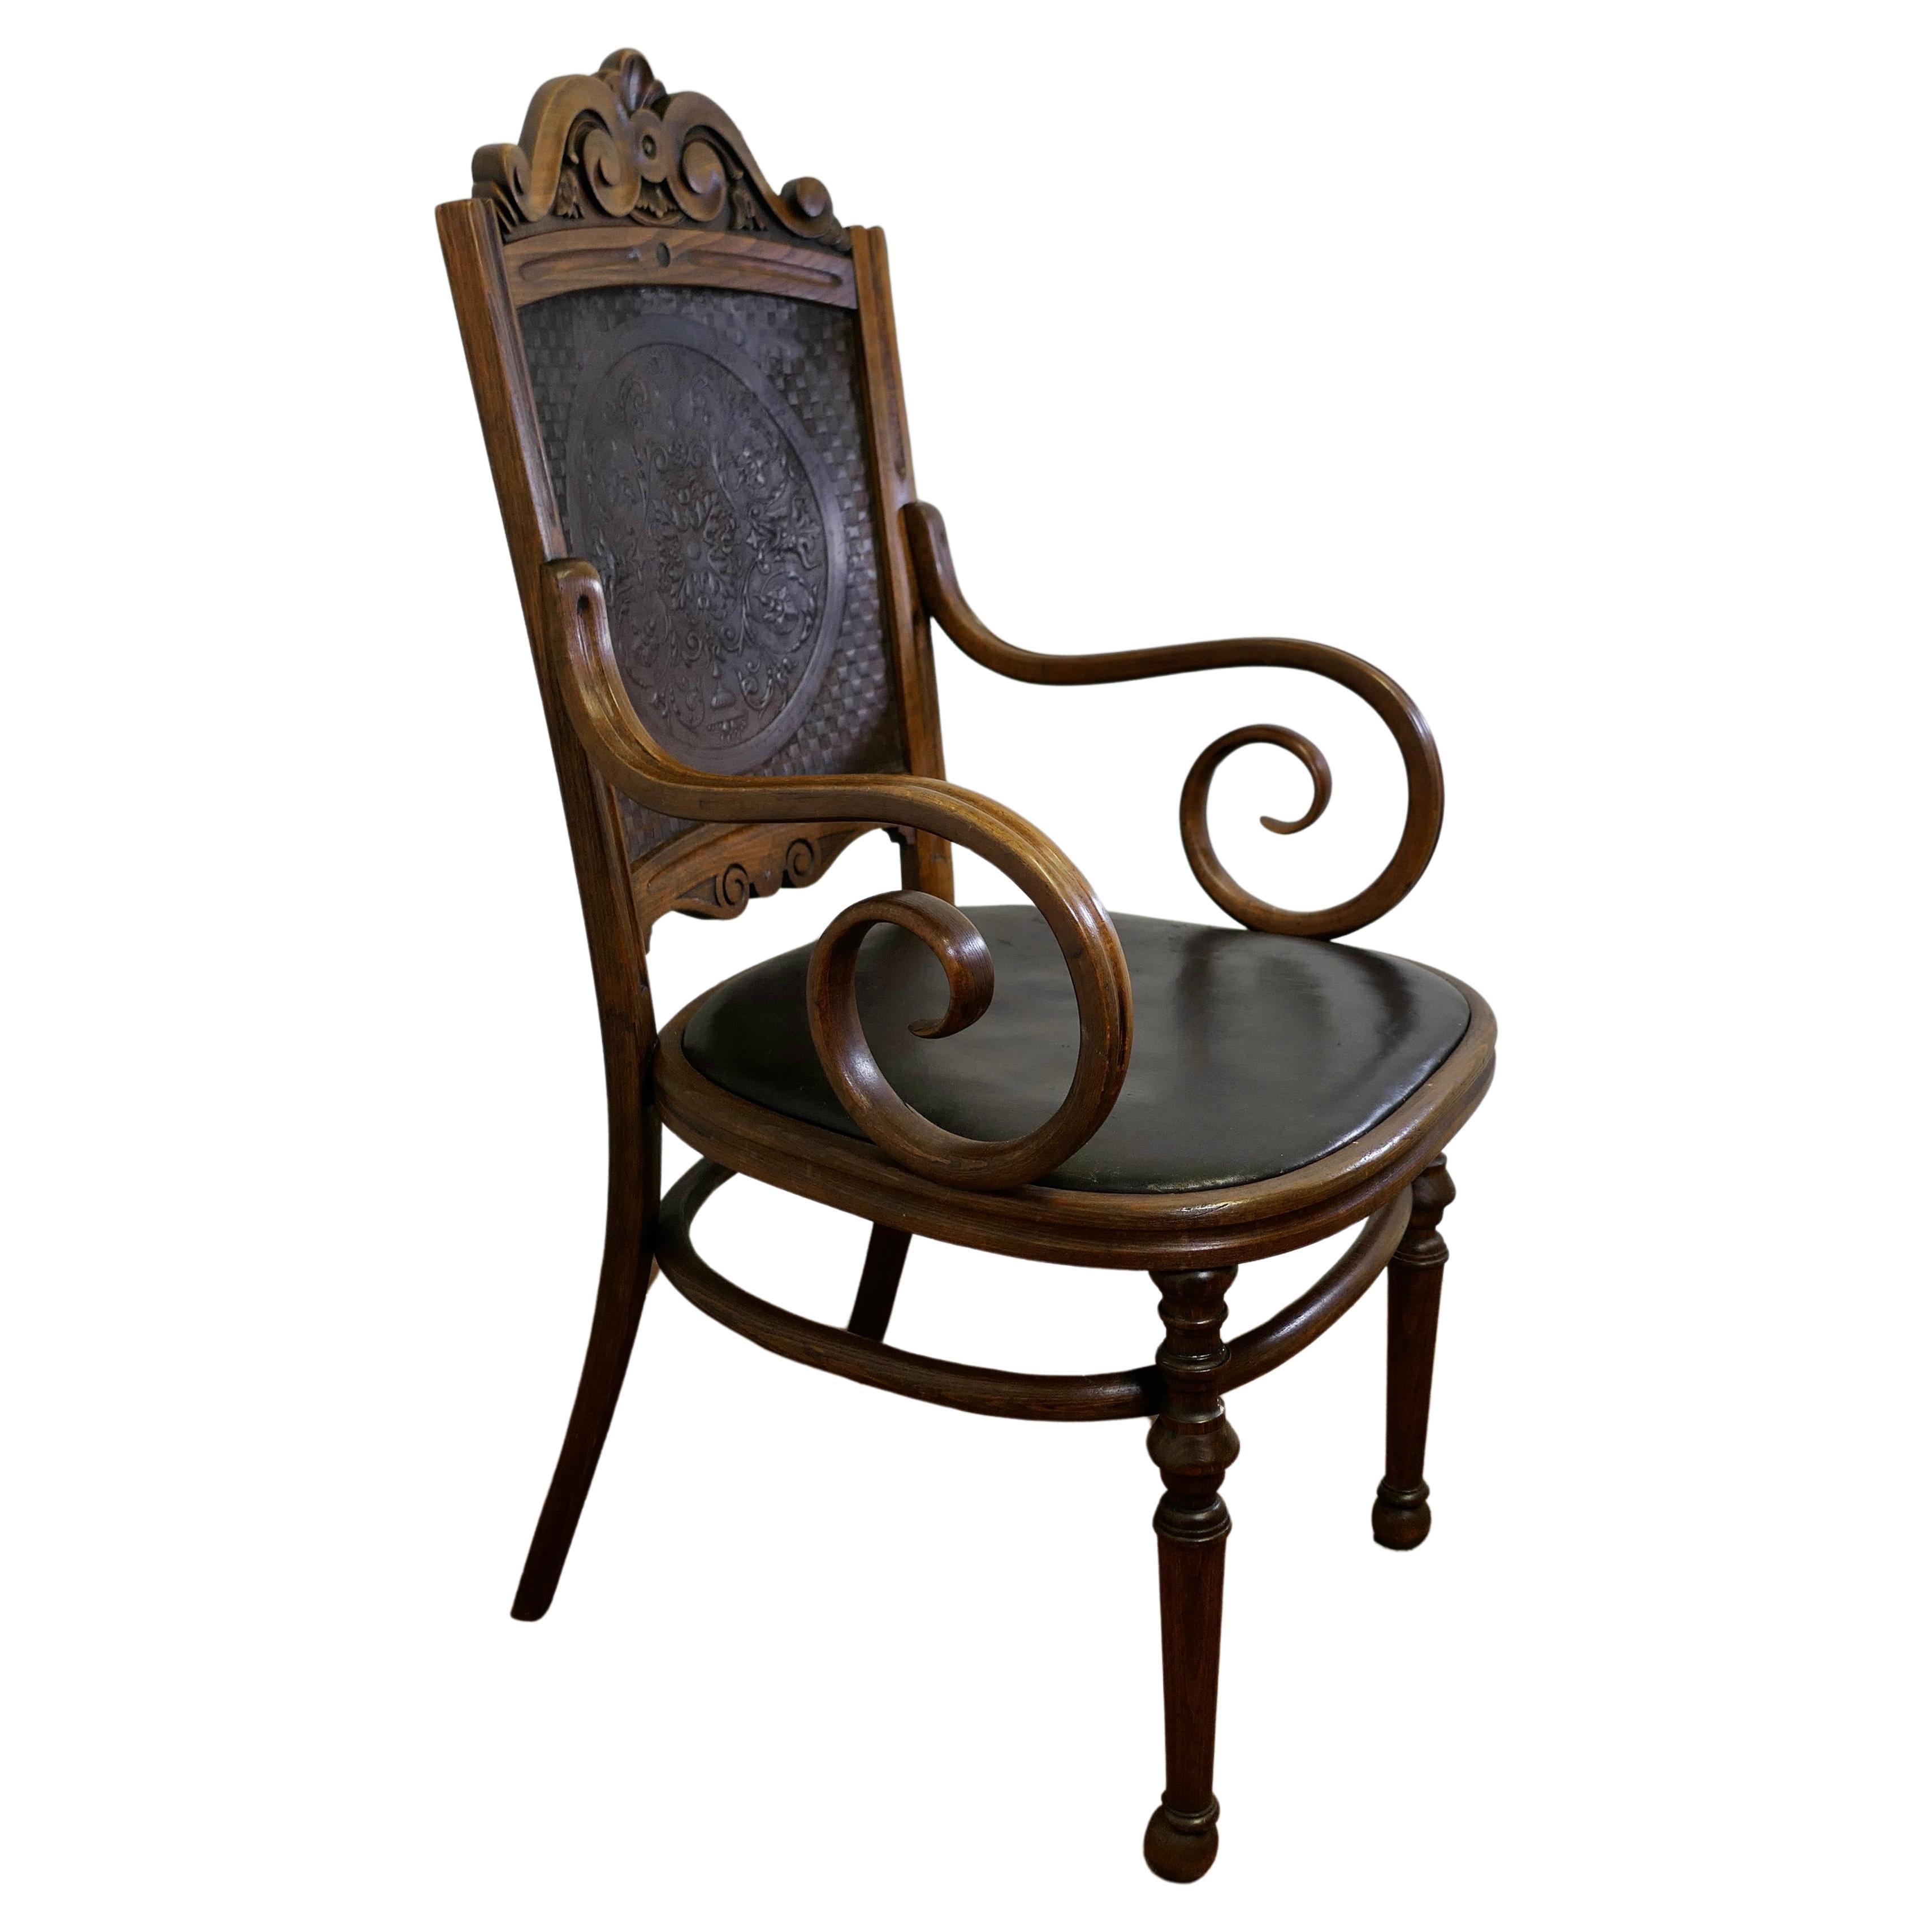 Victorian Upholstered Bentwood Salon or Desk Chair  This is a charming piece 